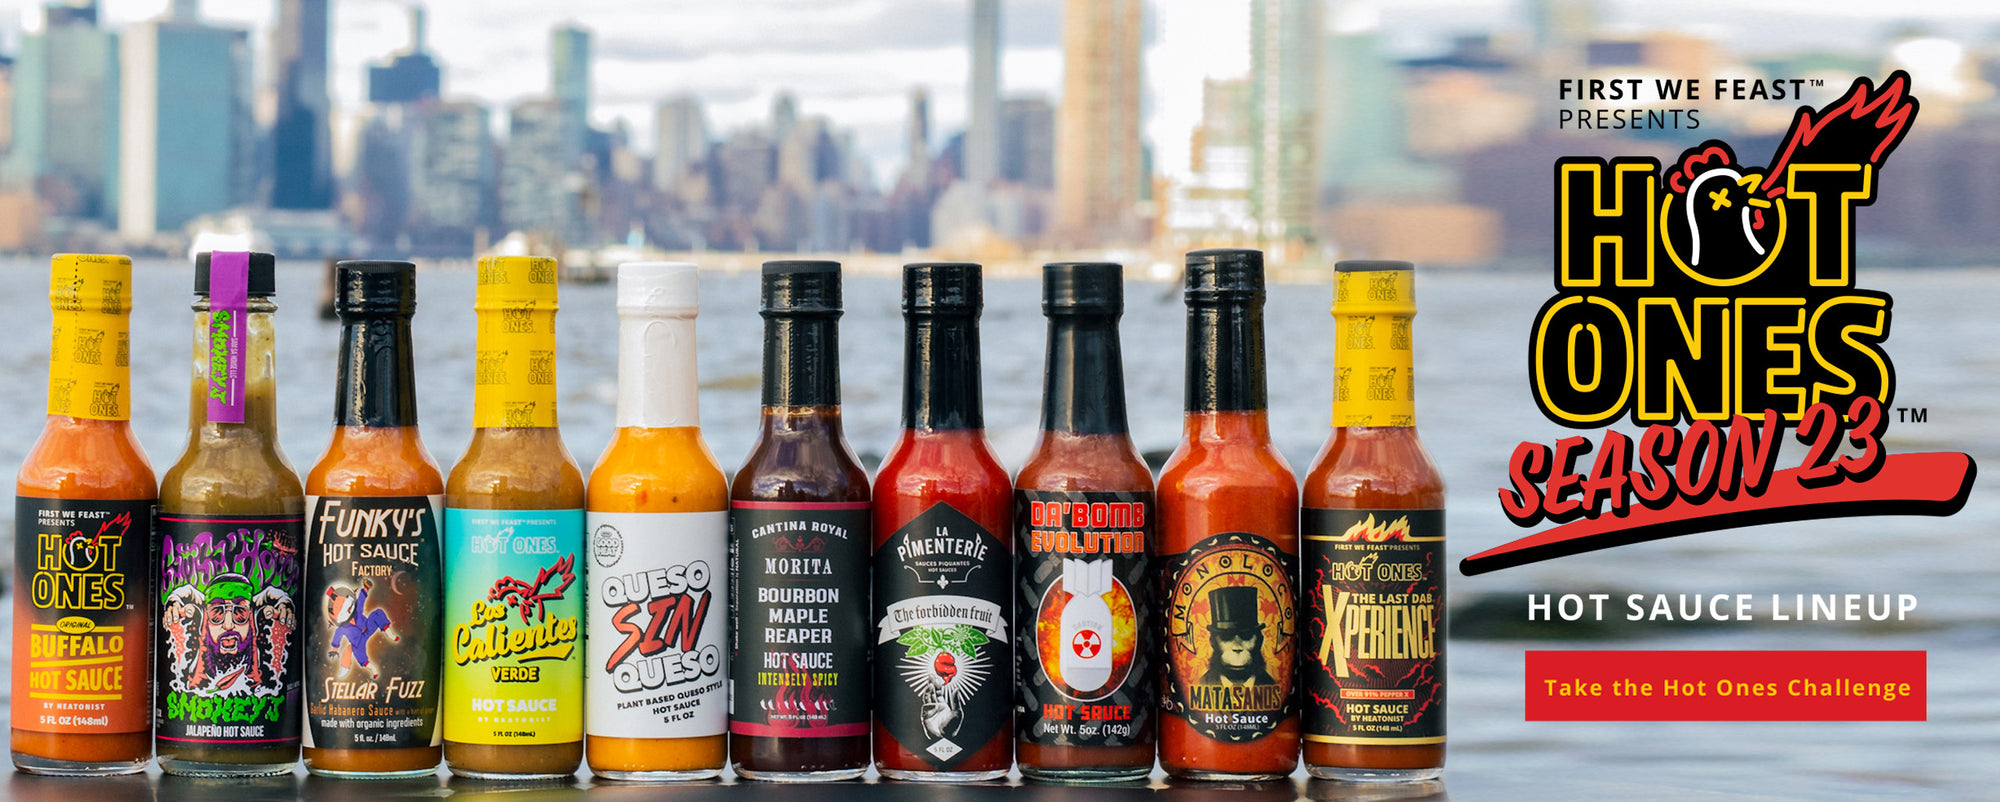 Hot Ones hot sauces from Season 23